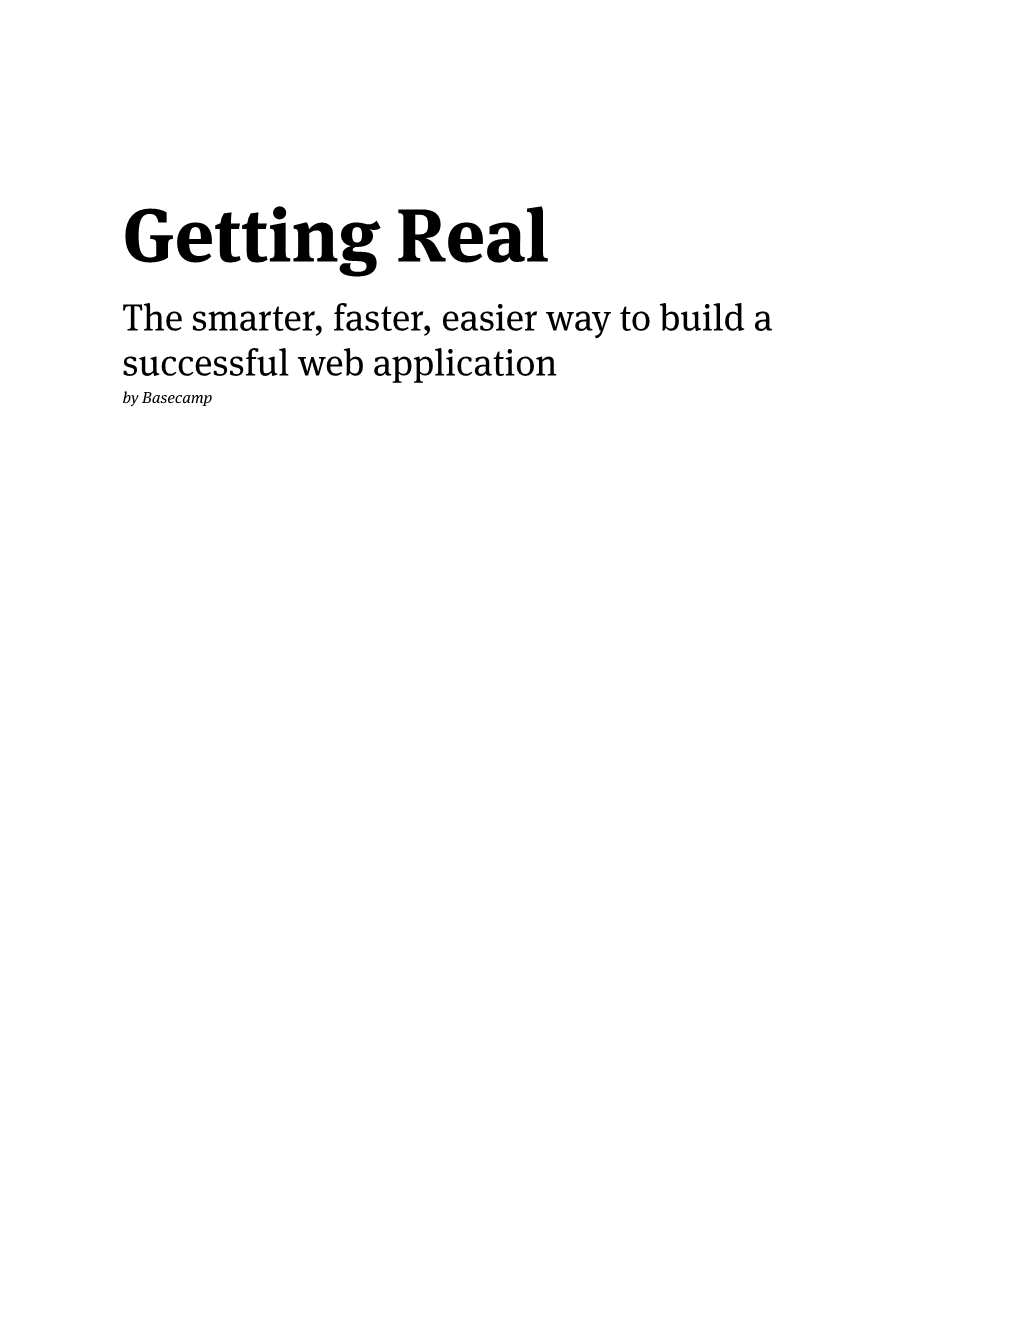 Getting Real the Smarter, Faster, Easier Way to Build a Successful Web Application by Basecamp Table of Contents